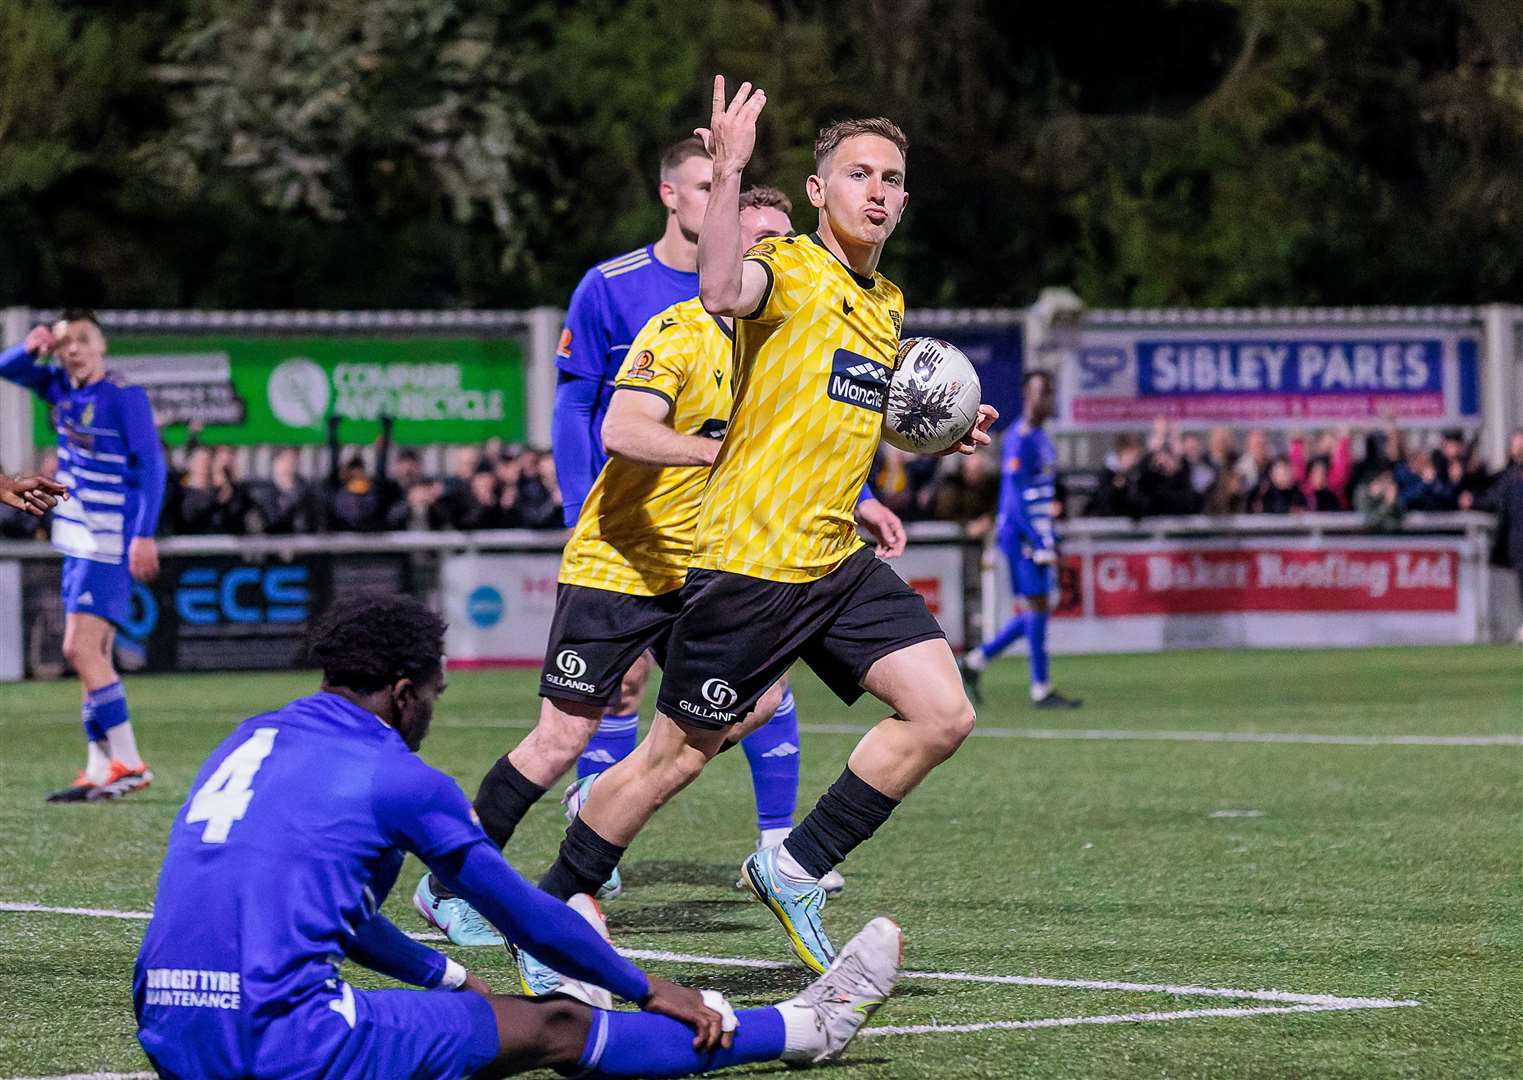 Maidstone came from a goal down to beat Aveley in the play-off eliminator, with Matt Rush scoring the equaliser. Picture: Helen Cooper